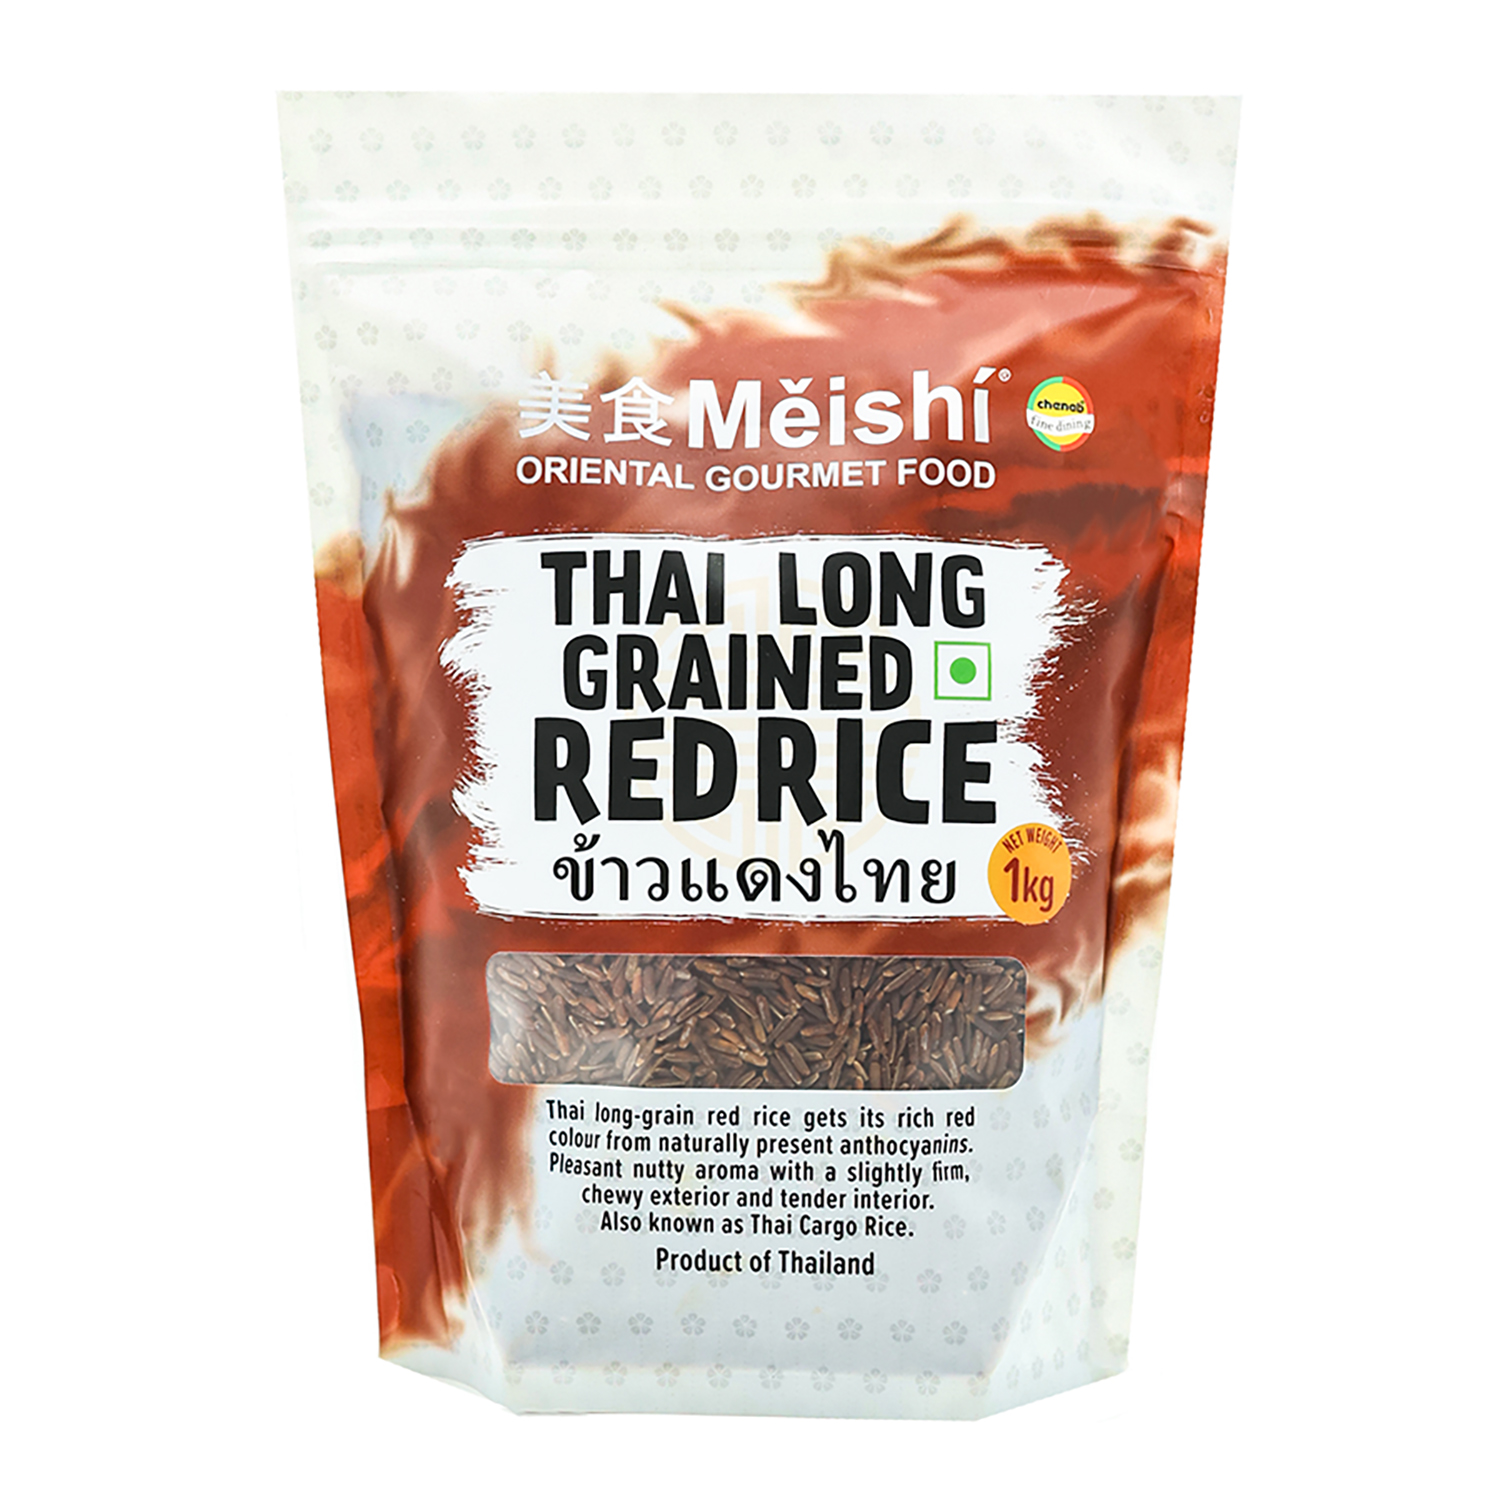 Meishi Thai Long Grained Red Rice, 1kg